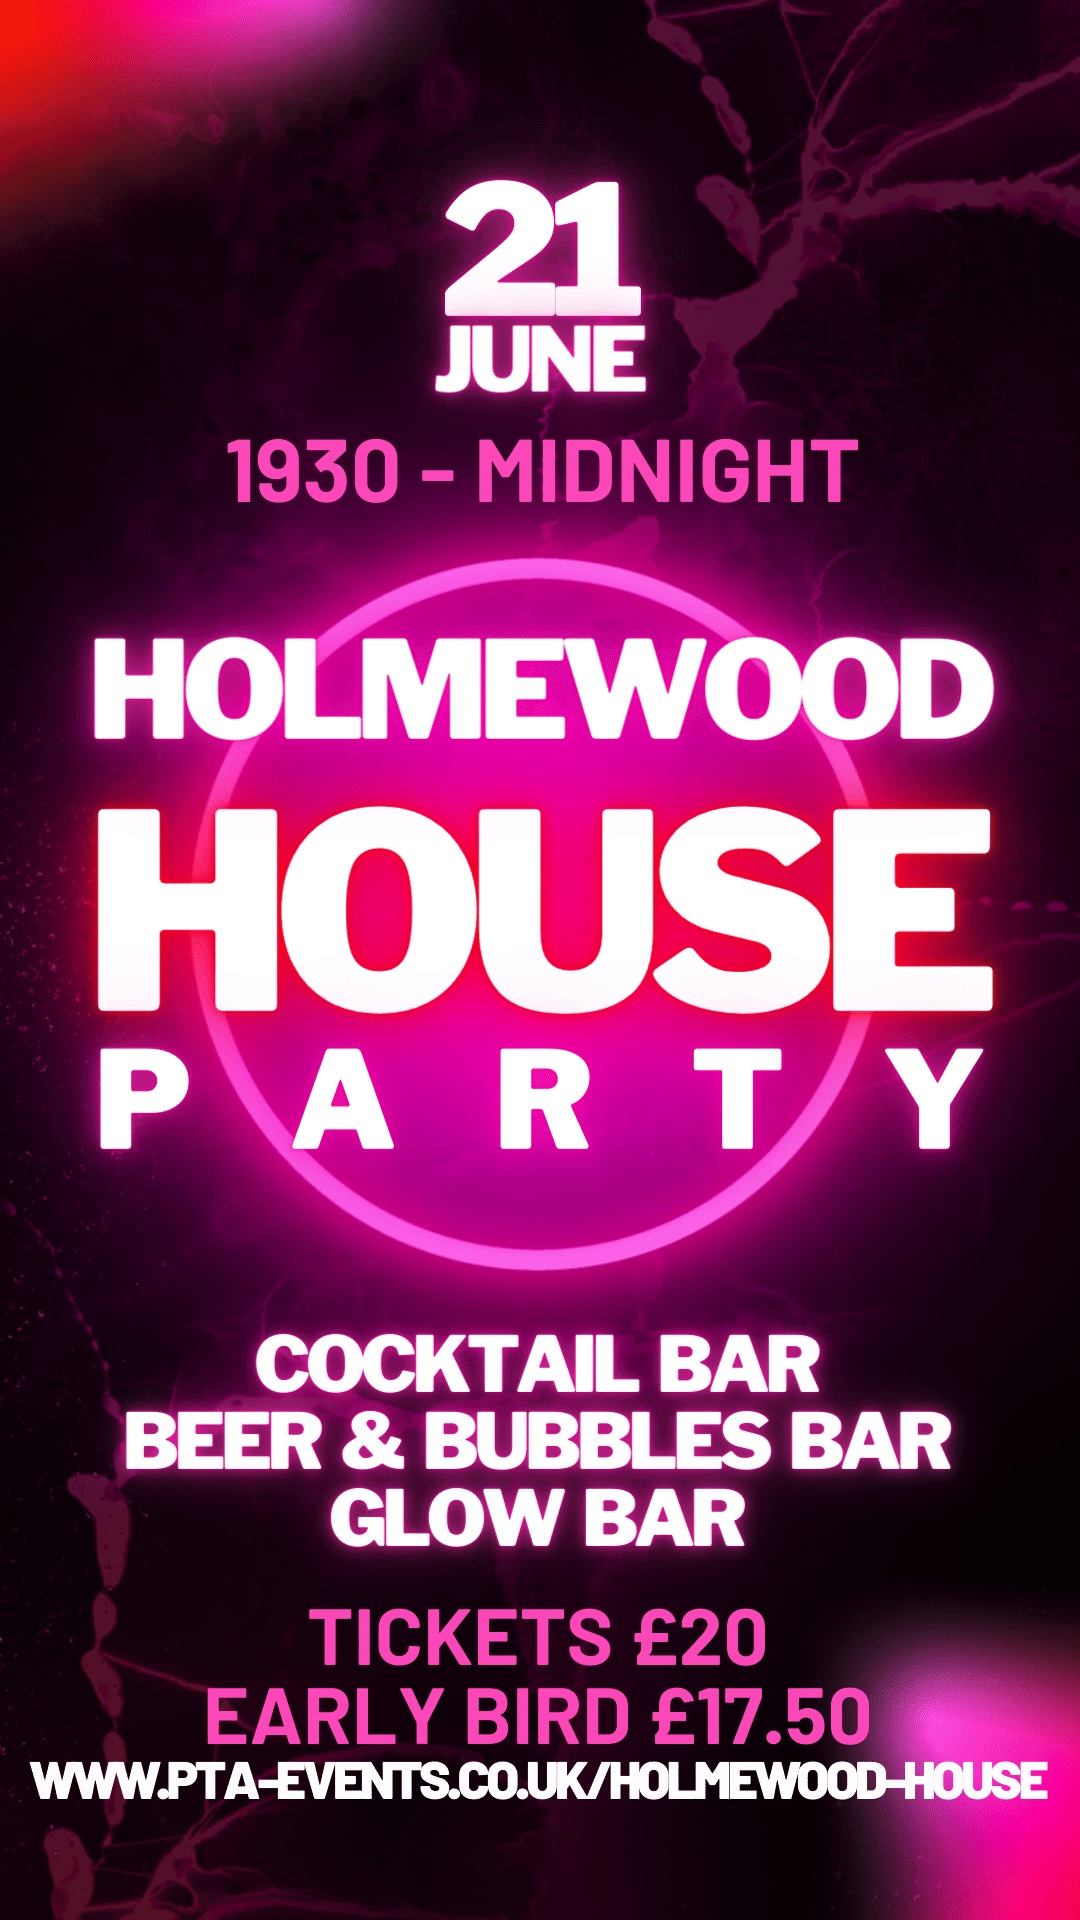 HOLMEWOOD HOUSE PARTY TICKET